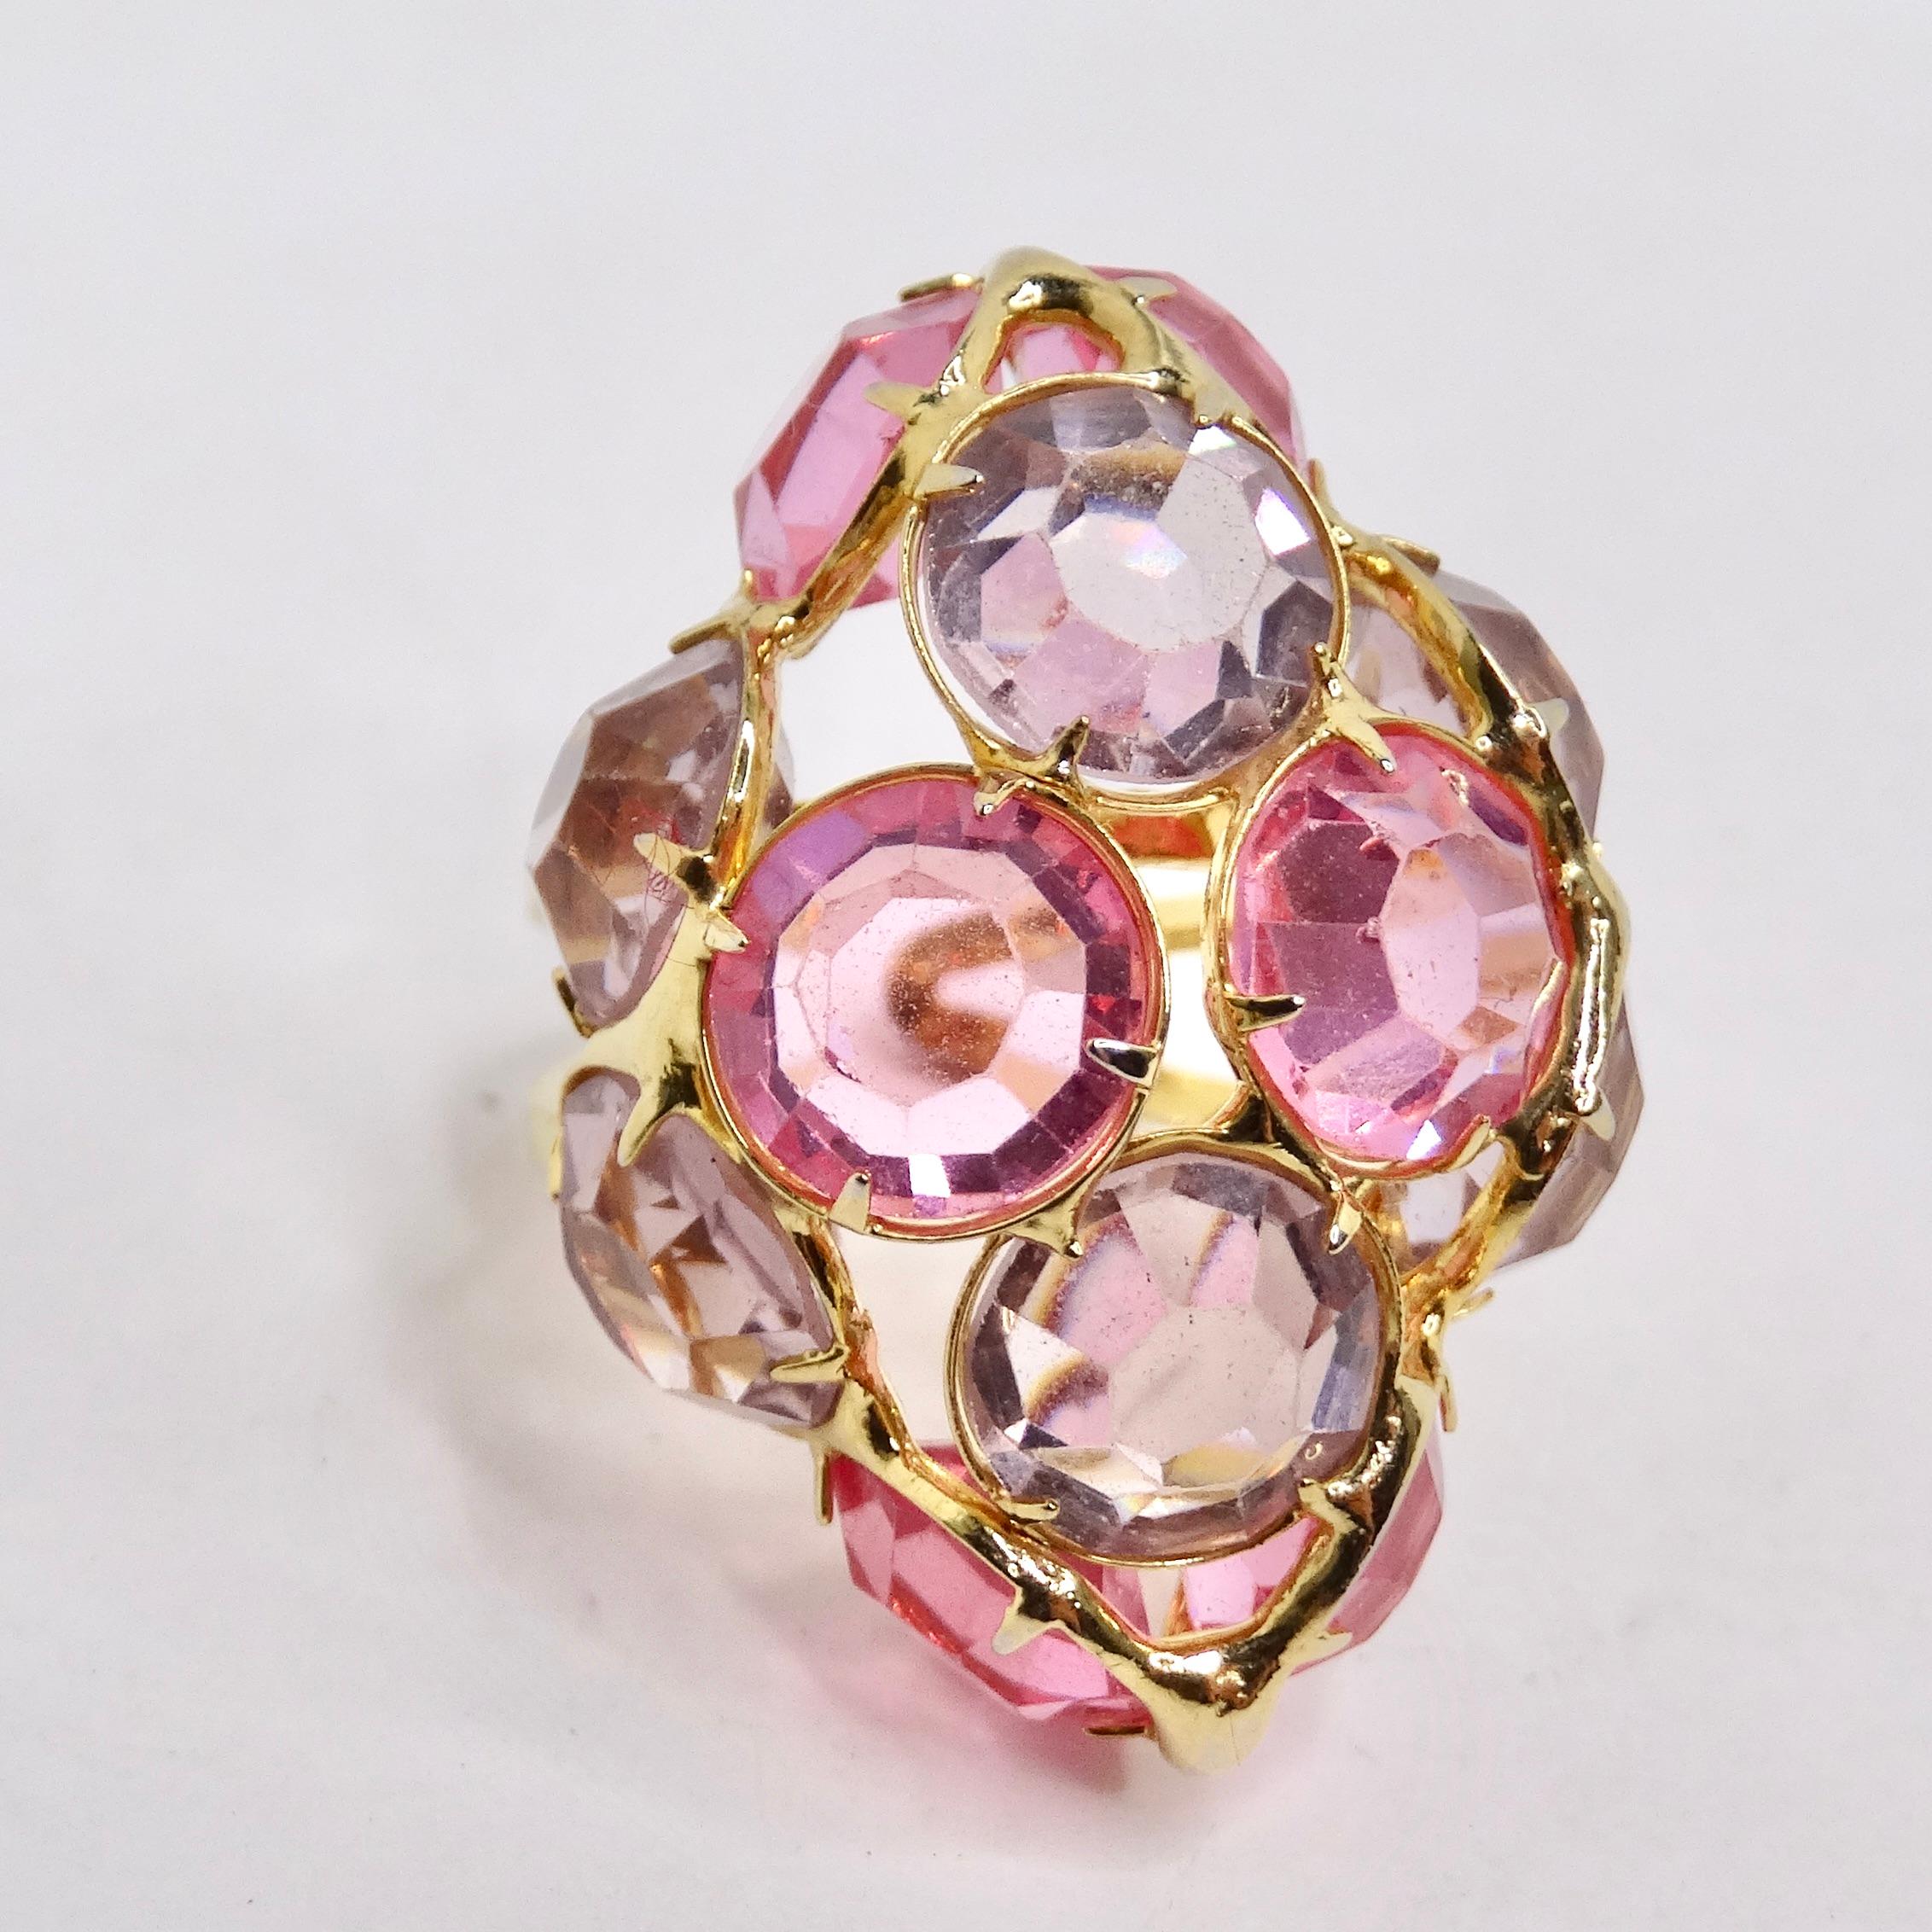 Elevate your style to new heights with our exquisite Pink Rhinestone 18K Gold Plated Cocktail Ring, a glamorous statement piece that will leave a lasting impression. Crafted in the 1970s, this ring boasts a stunning cluster of light pink and purple